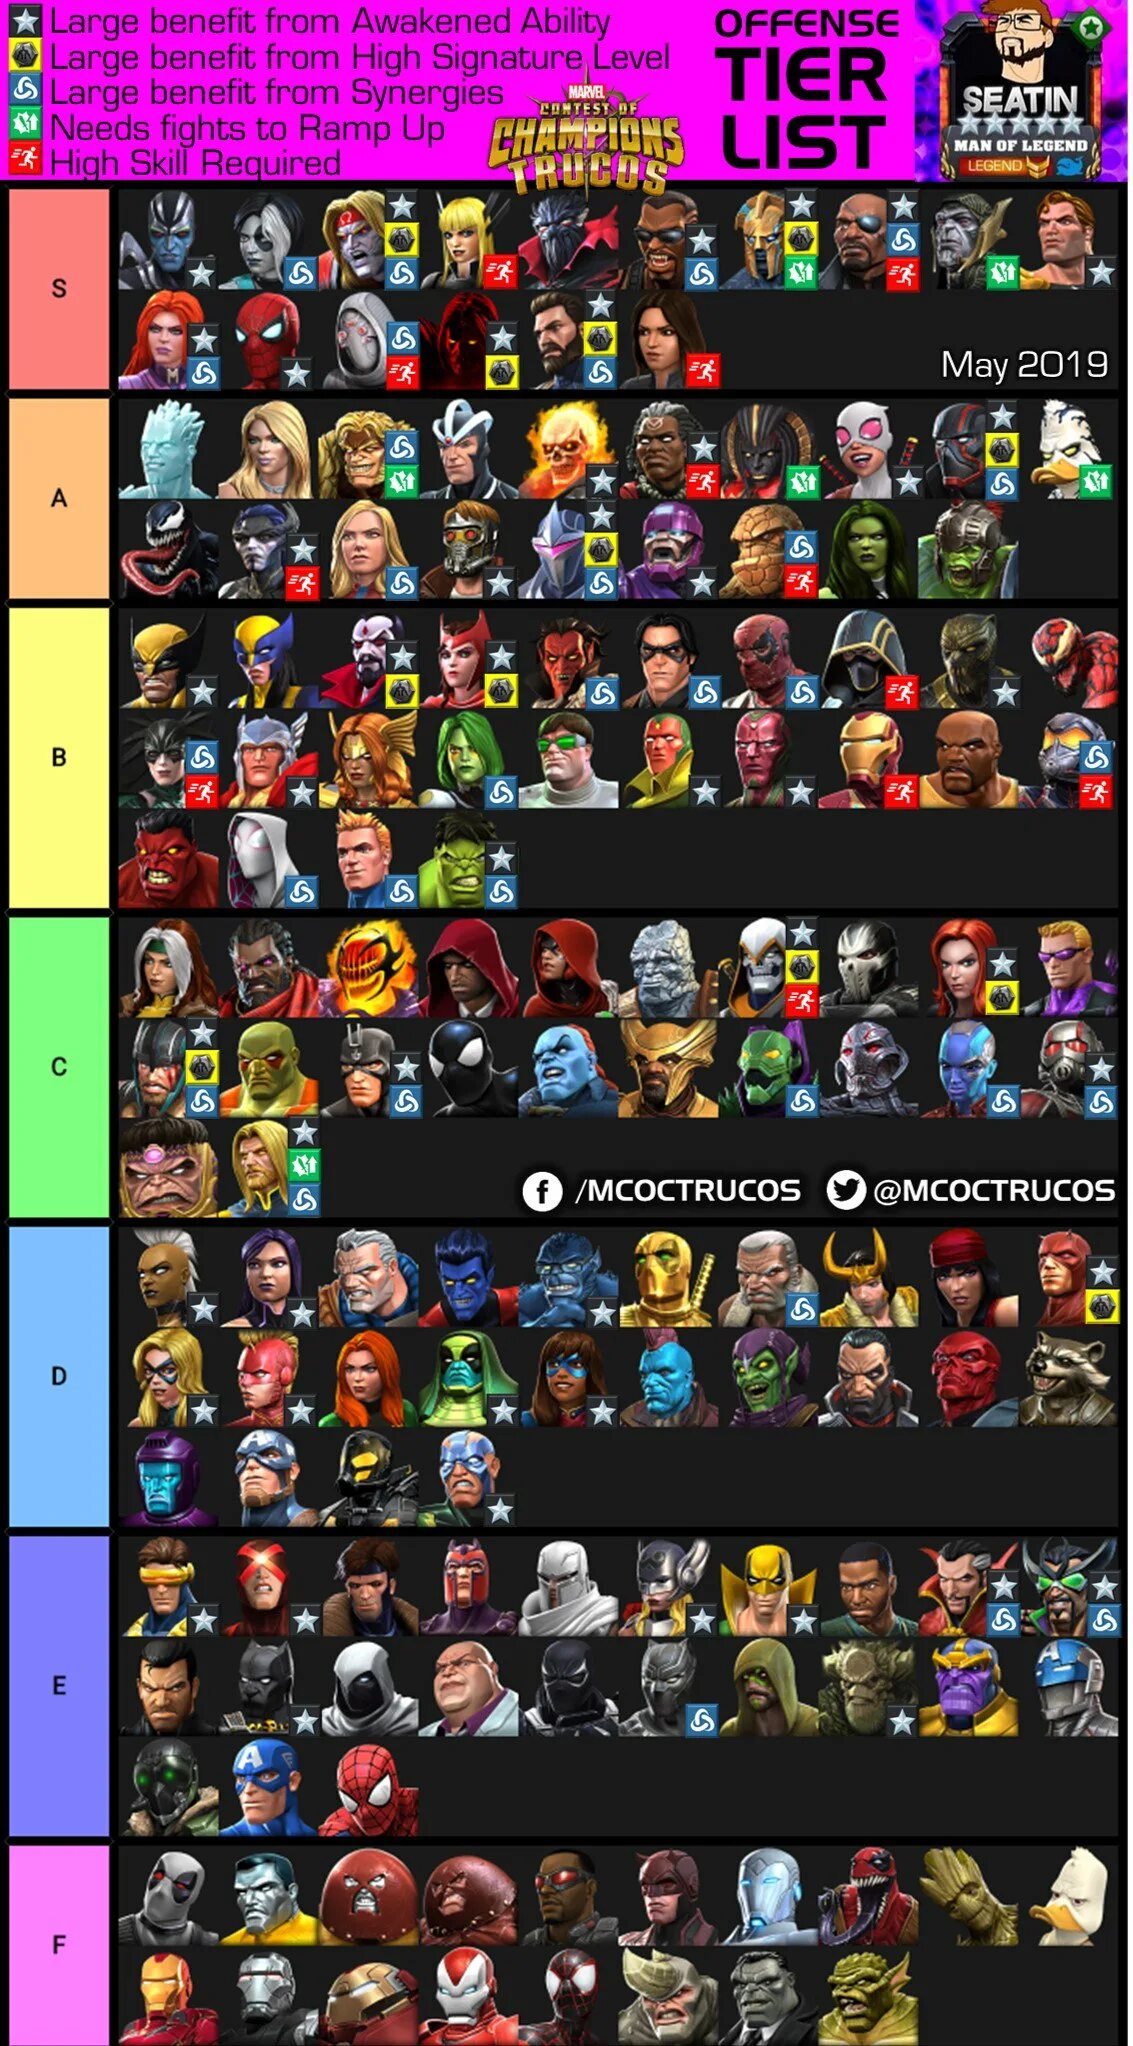 Marvel Contest of Champions Tier list 2022. MCOC Tier list. Marvel Contest of Champions Tier list. Dota 2 characters Tier list.